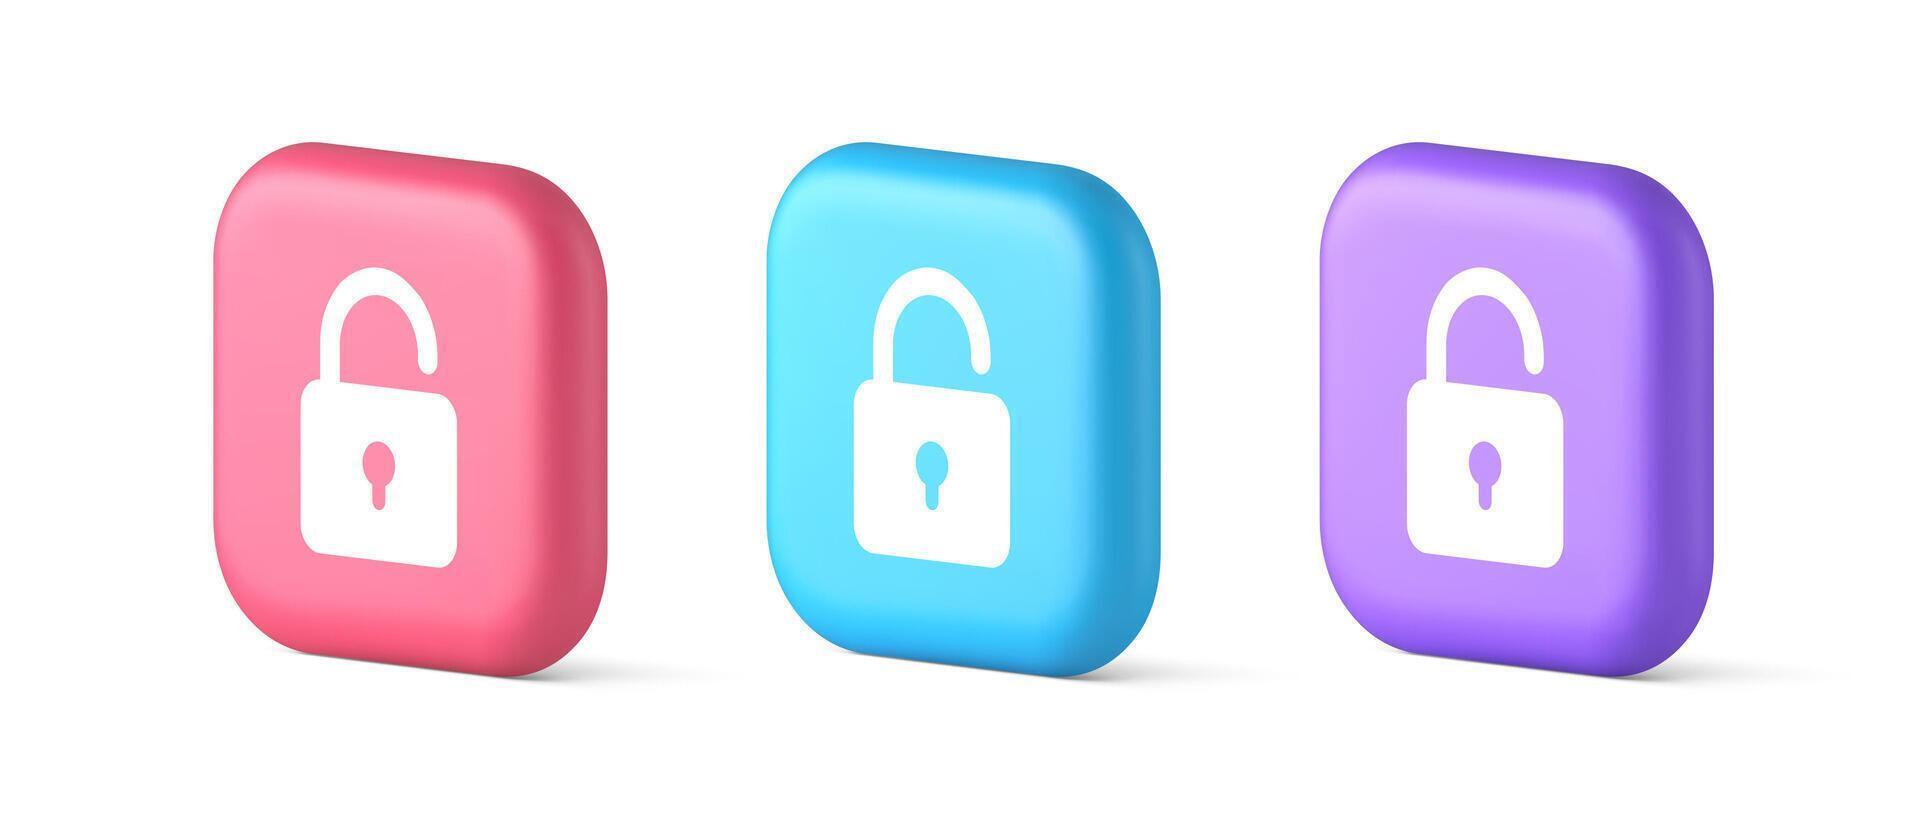 Open lock button cyberspace password security protection service 3d realistic icon vector